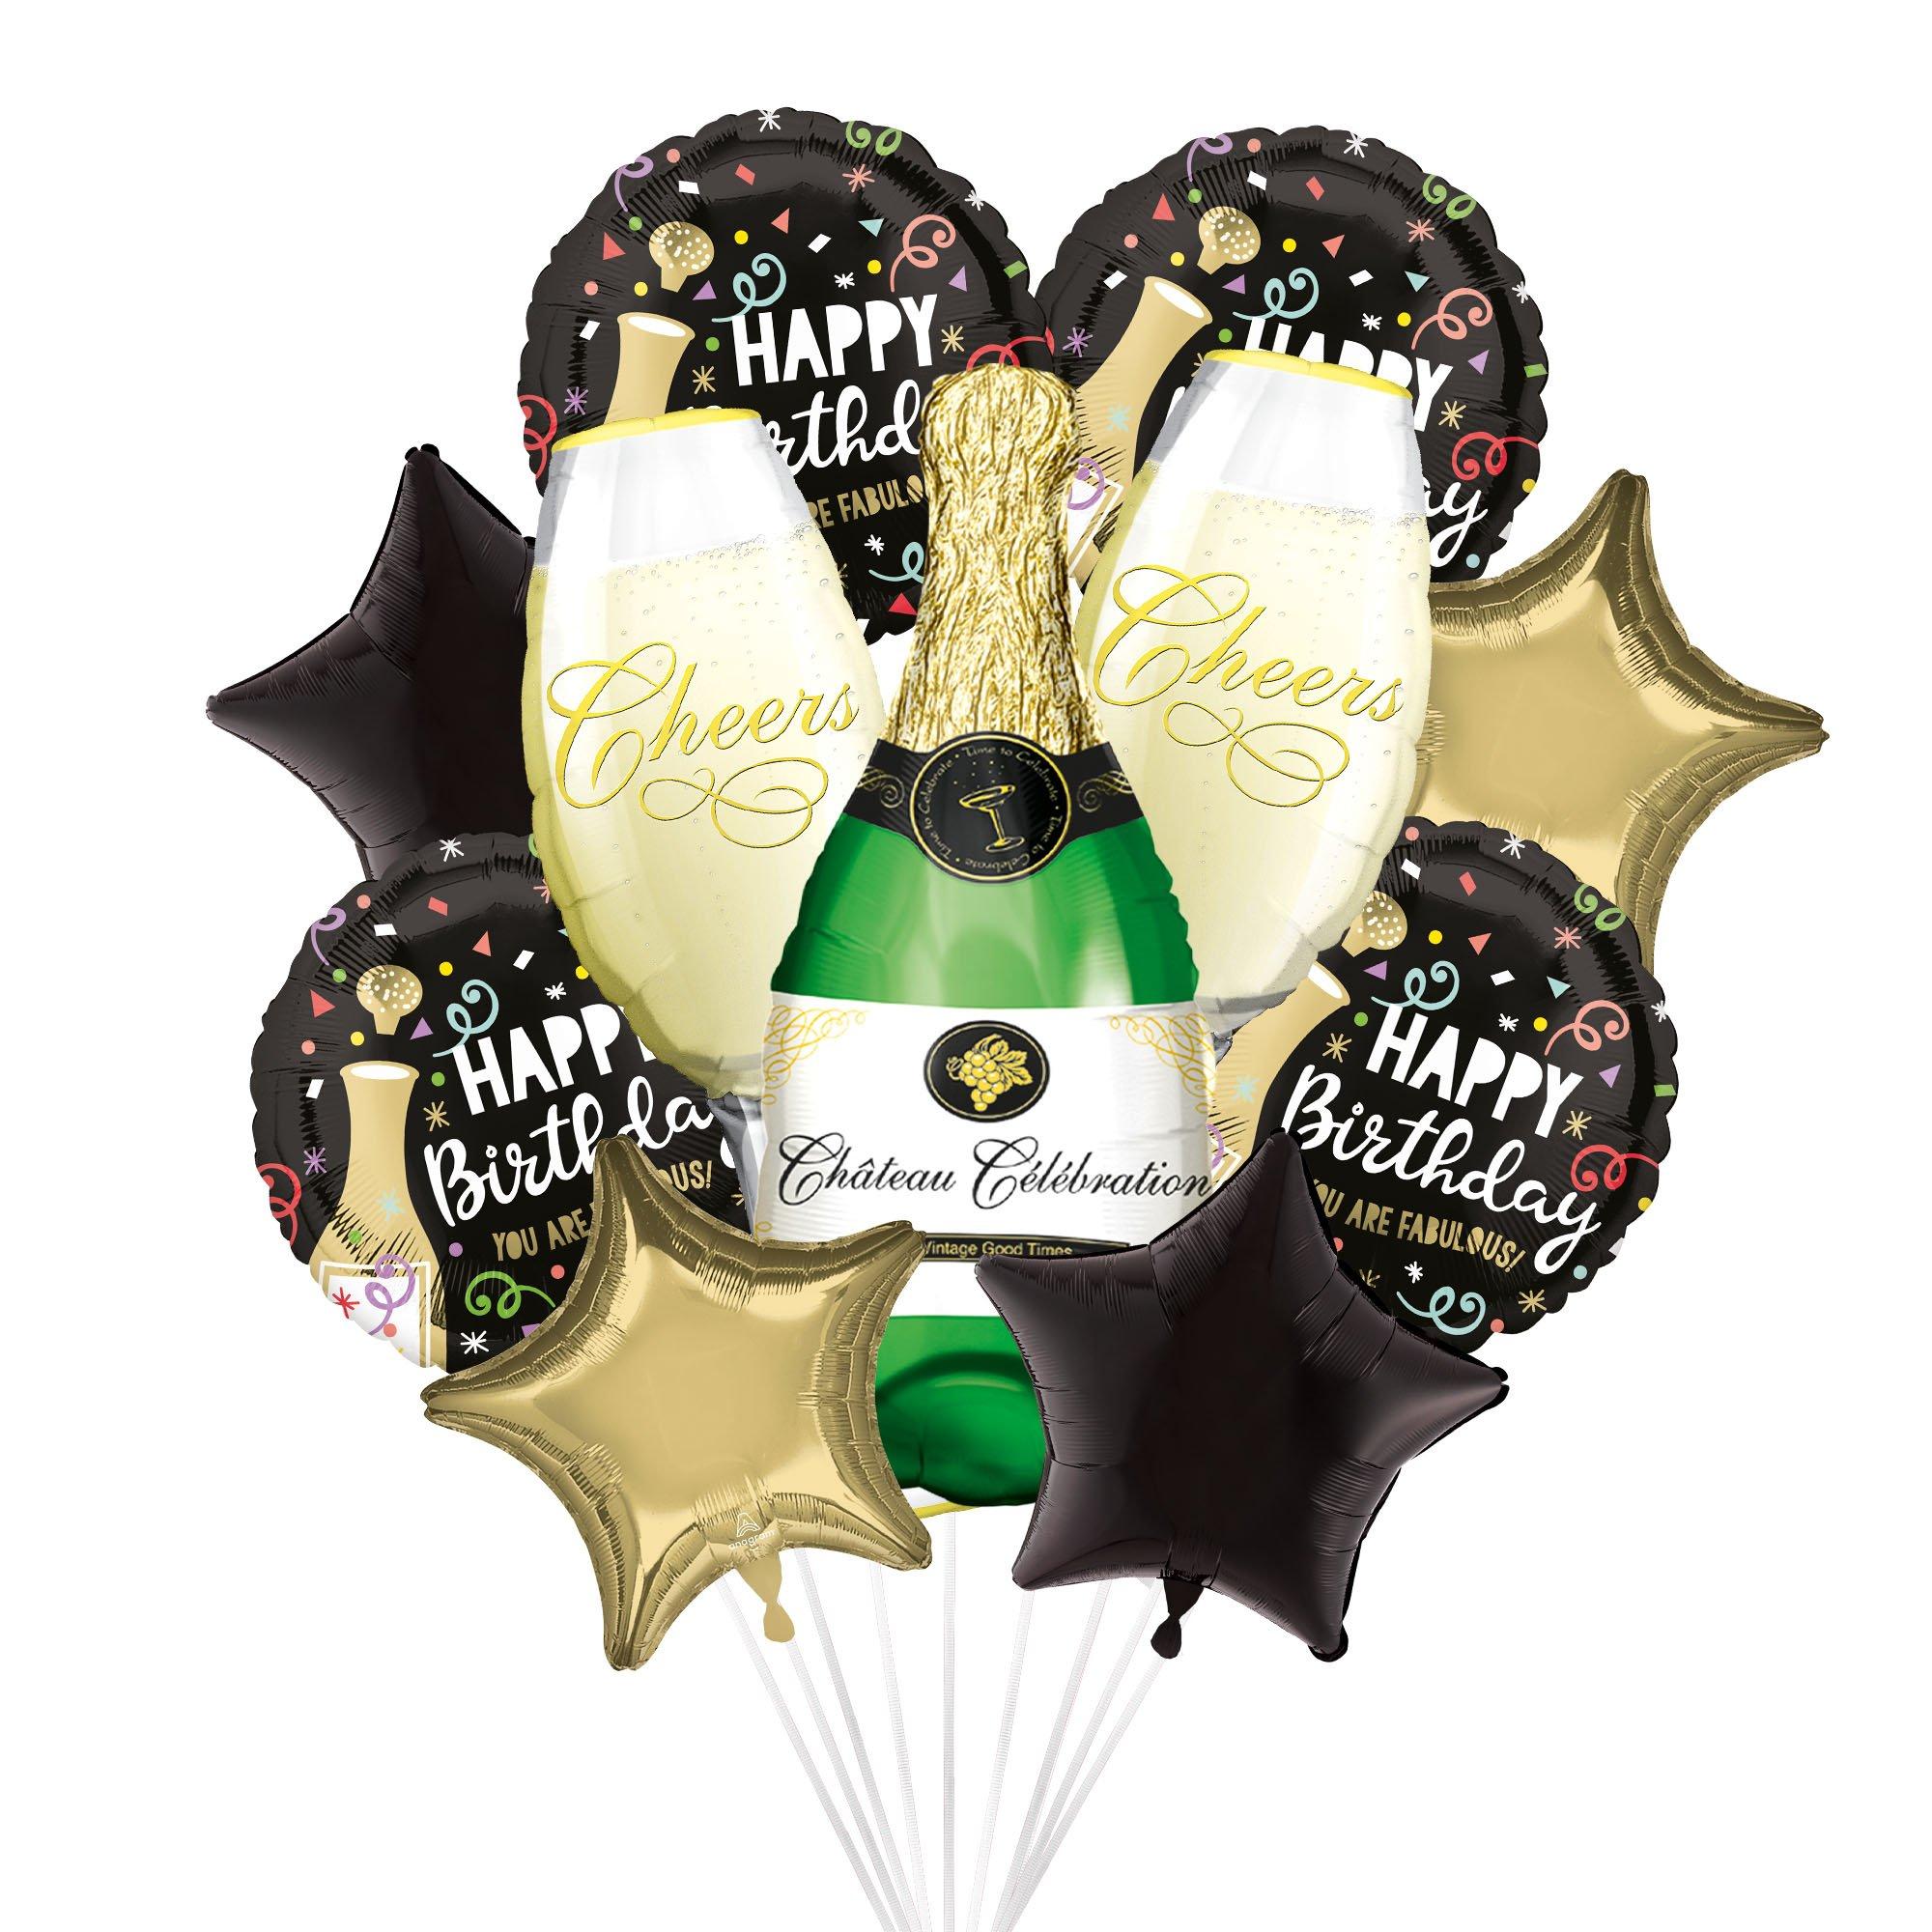 Civic stil storm Champagne Birthday Balloon Bouquet, 11pc | Party City